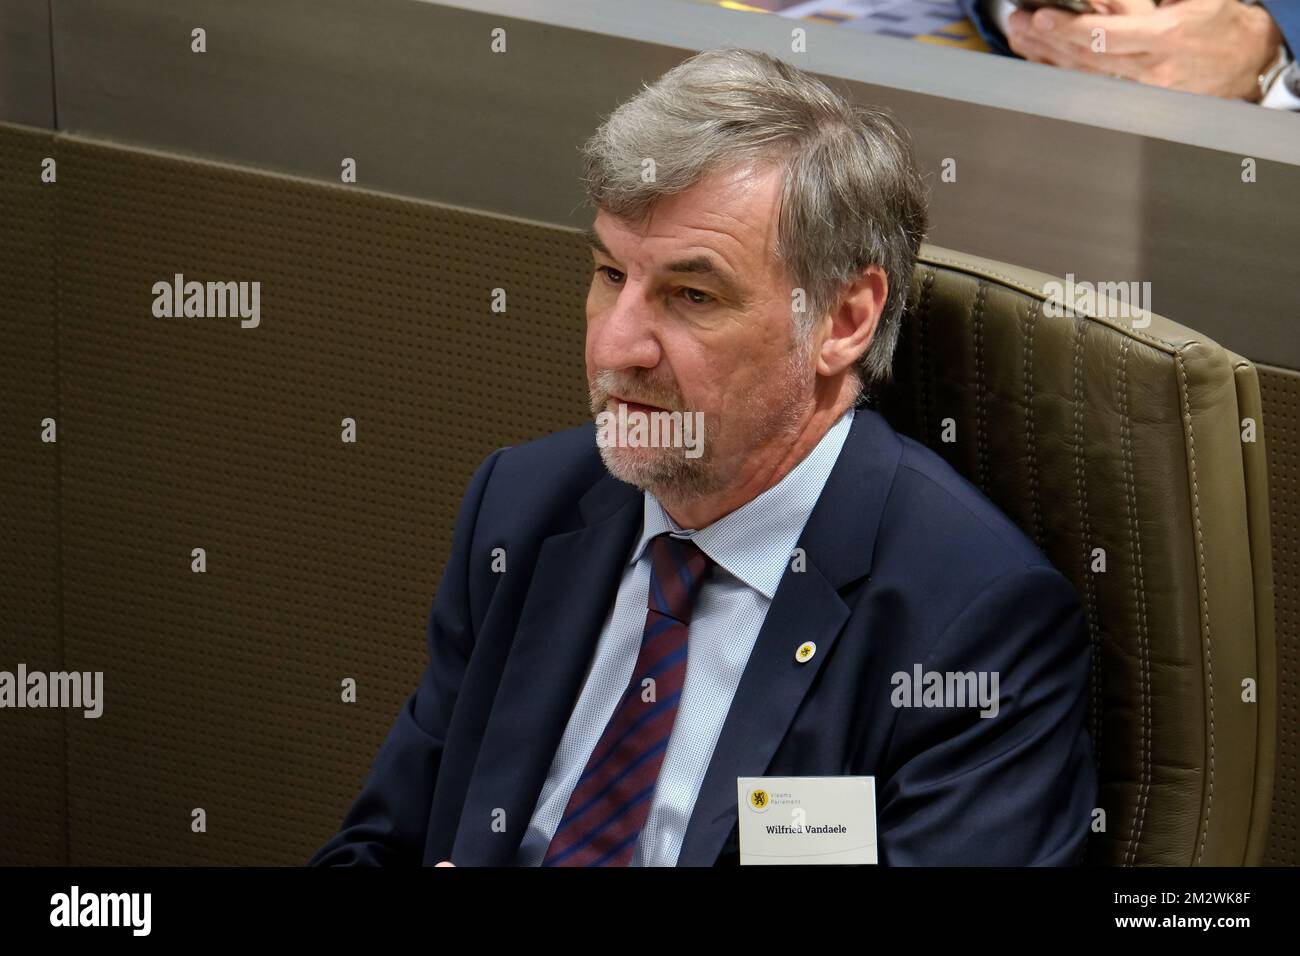 N-VA's Wilfried Vandaele pictured during the oath taking ceremony at the Flemish Parliament in Brussels, Tuesday 18 June 2019. BELGA PHOTO NICOLAS MAETERLINCK Stock Photo